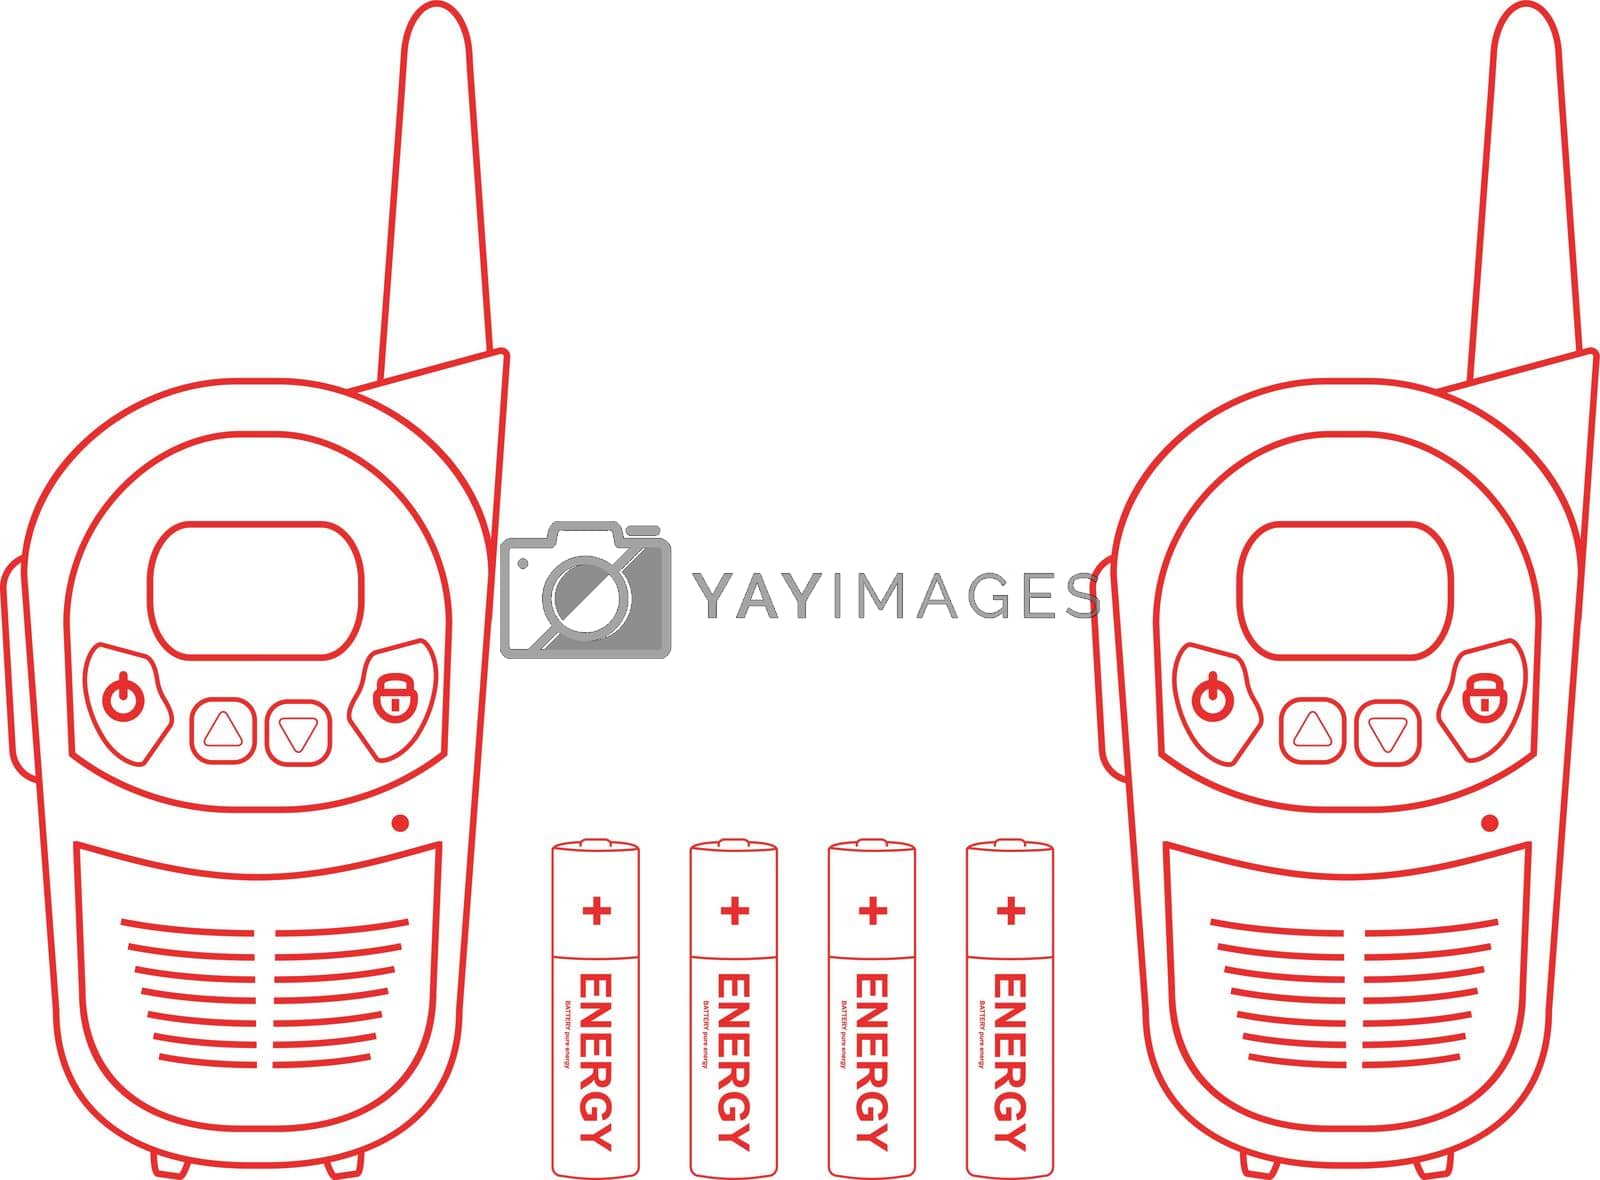 Two travel black portable mobile vector radio set devices wit 4 accumulator batteries. Contour lines illustration isolated on white